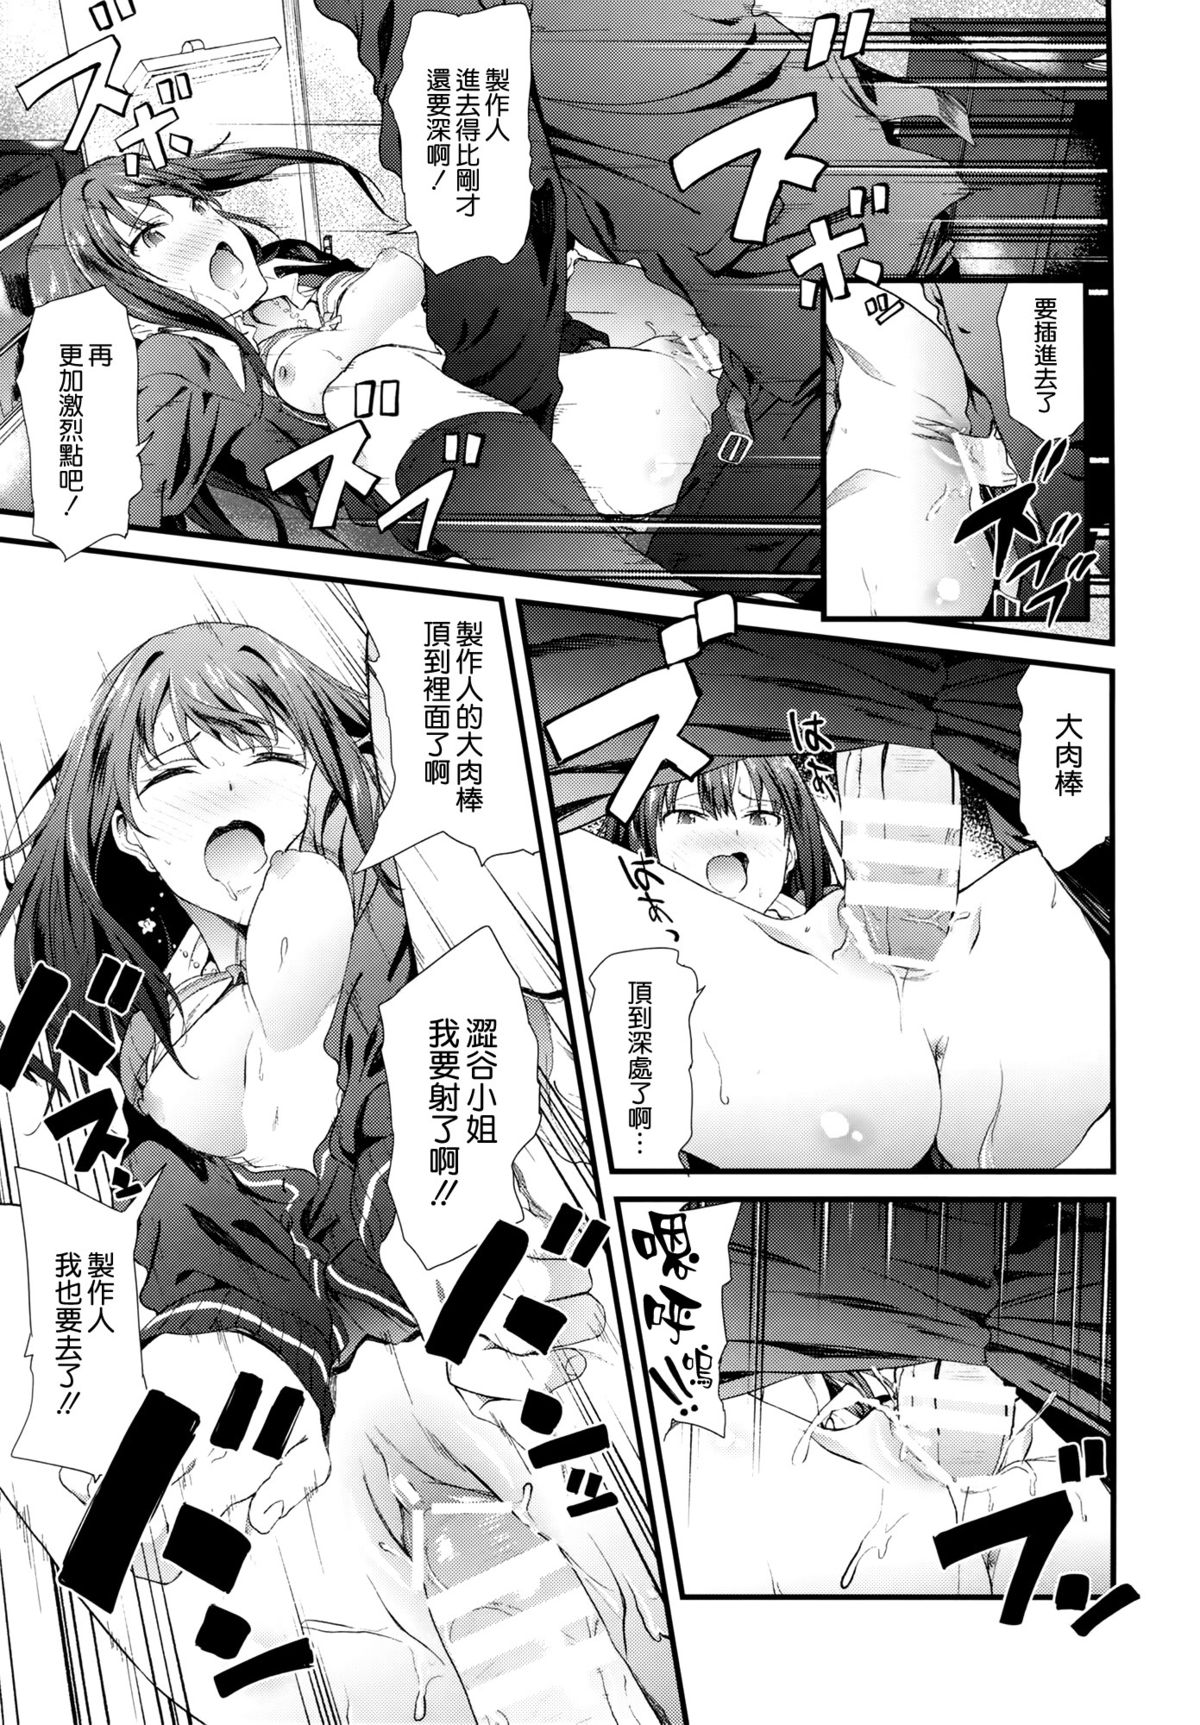 (C88) [EXTENDED PART (YOSHIKI)] SBRN (THE IDOLM@STER CINDERELLA GIRLS) [Chinese] [空気系☆漢化] page 19 full